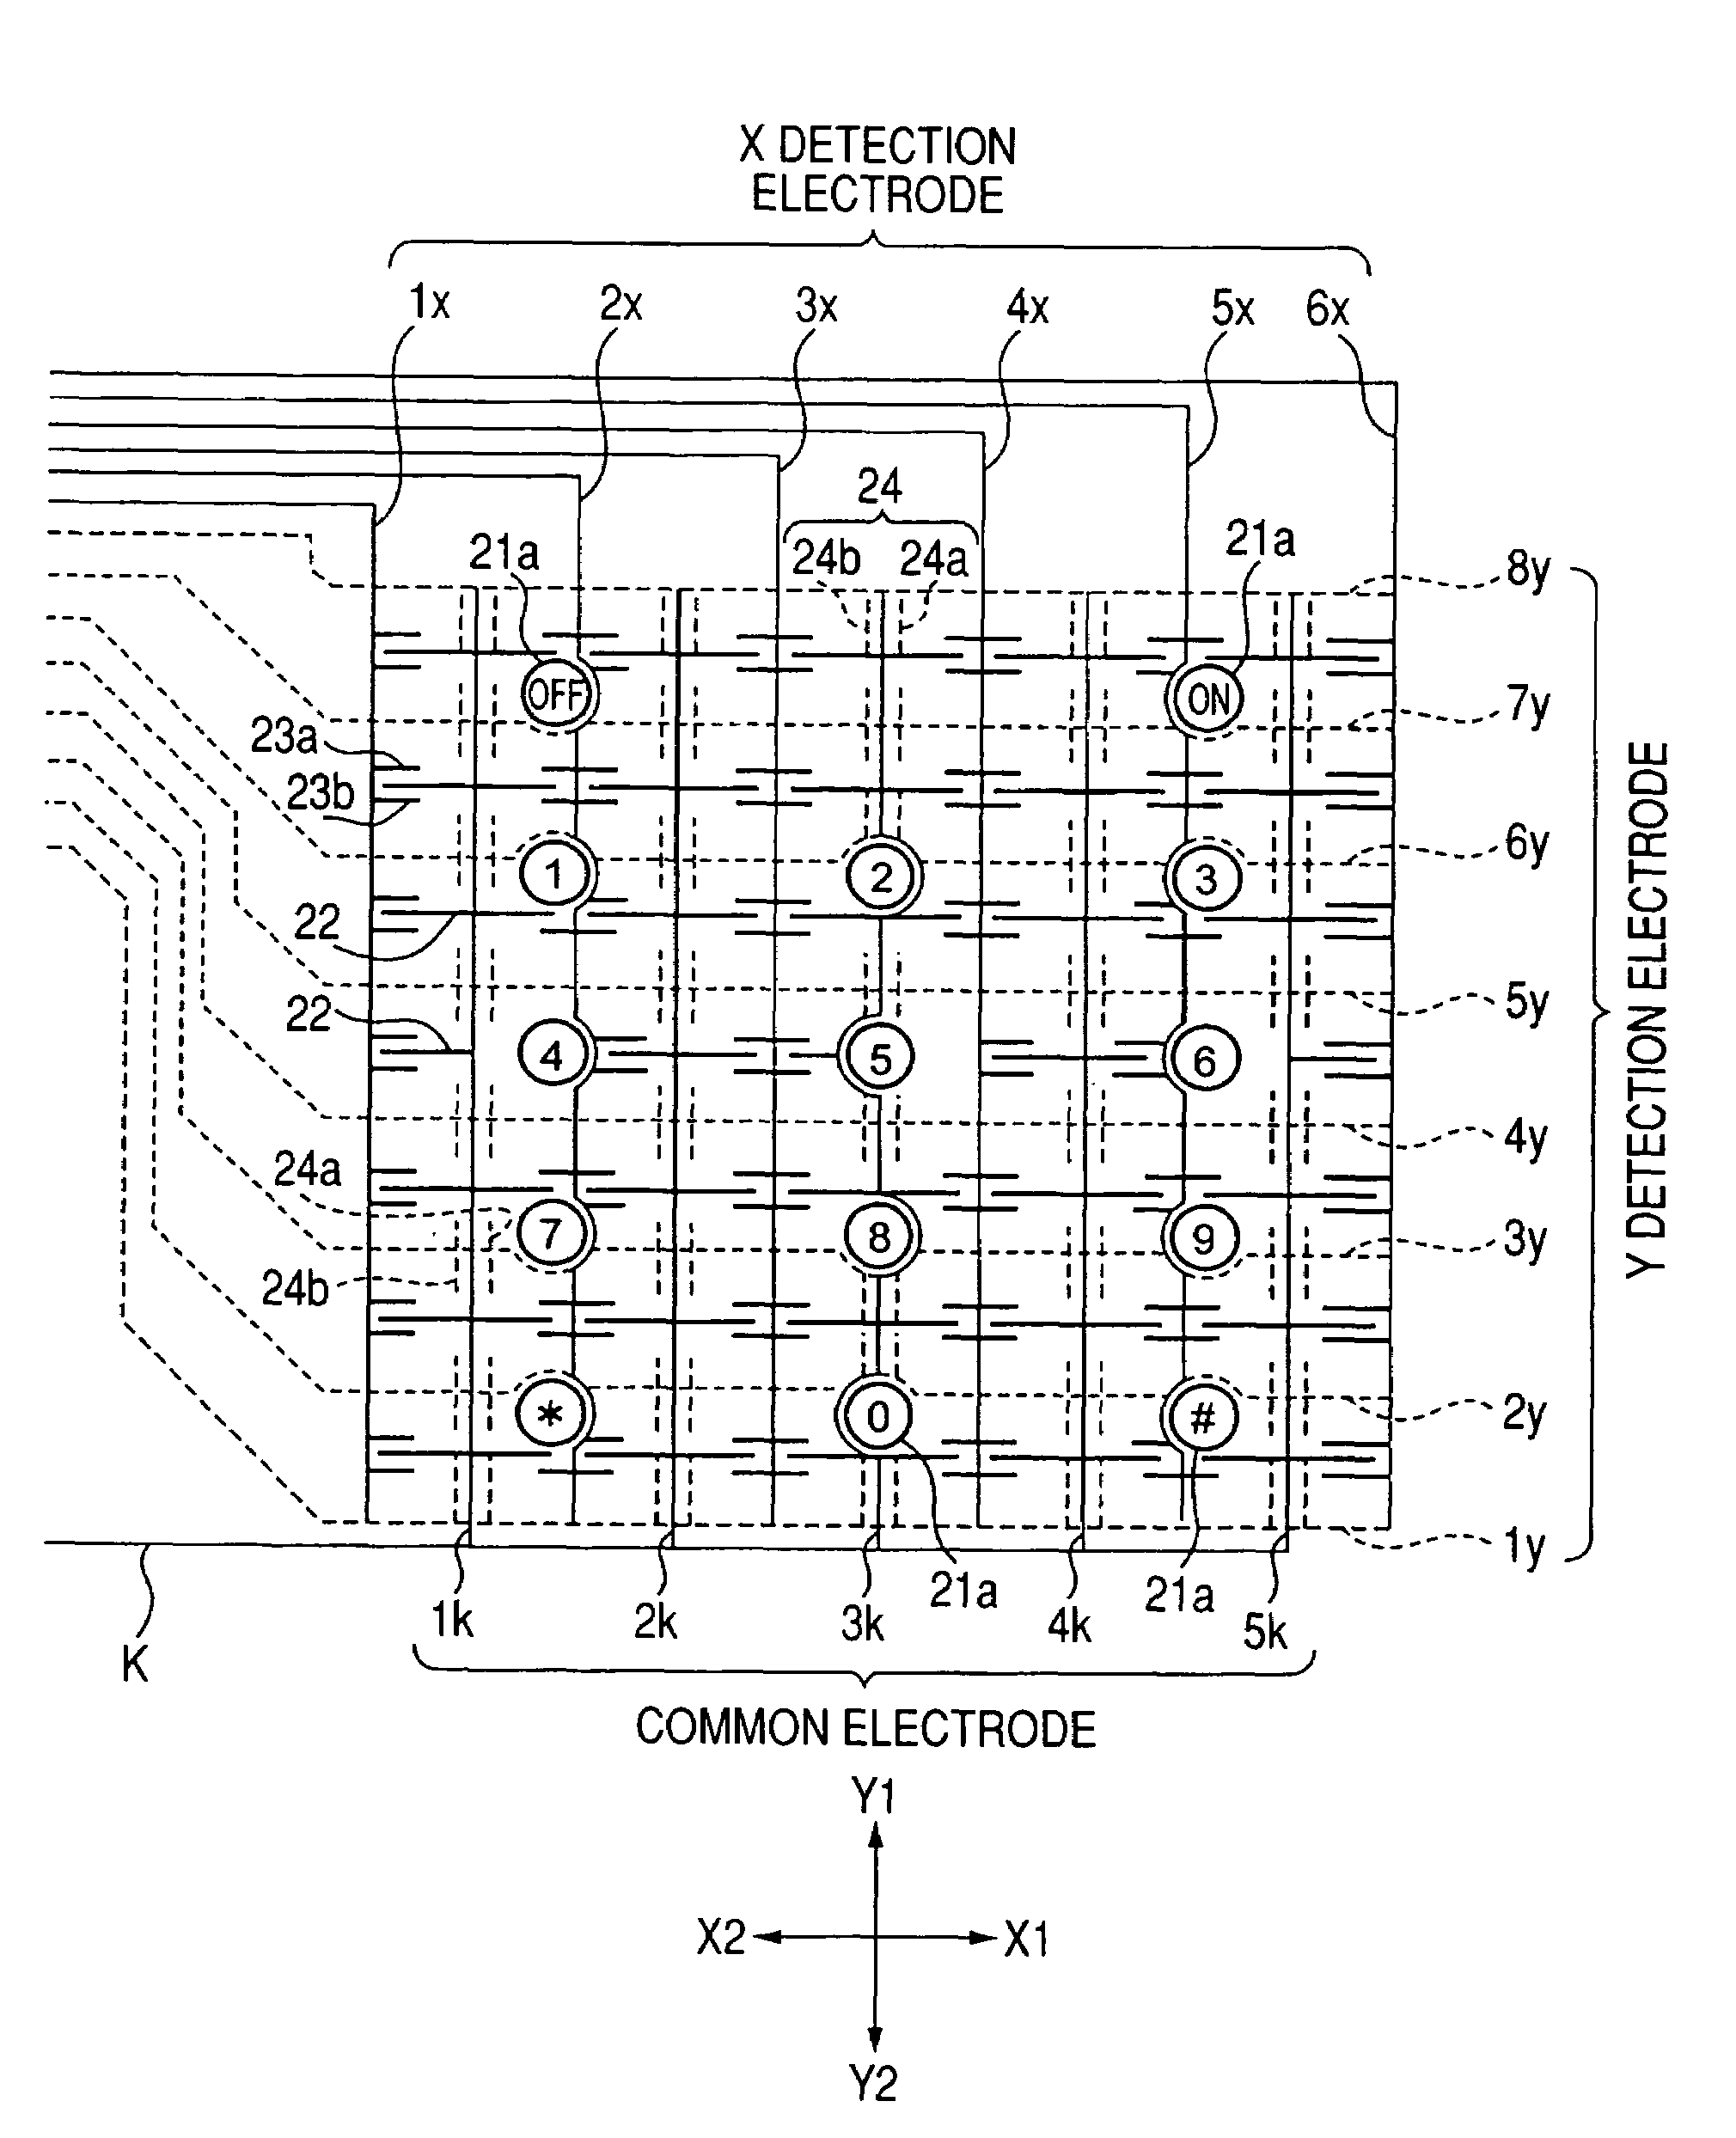 Capacitive coordinate detection device